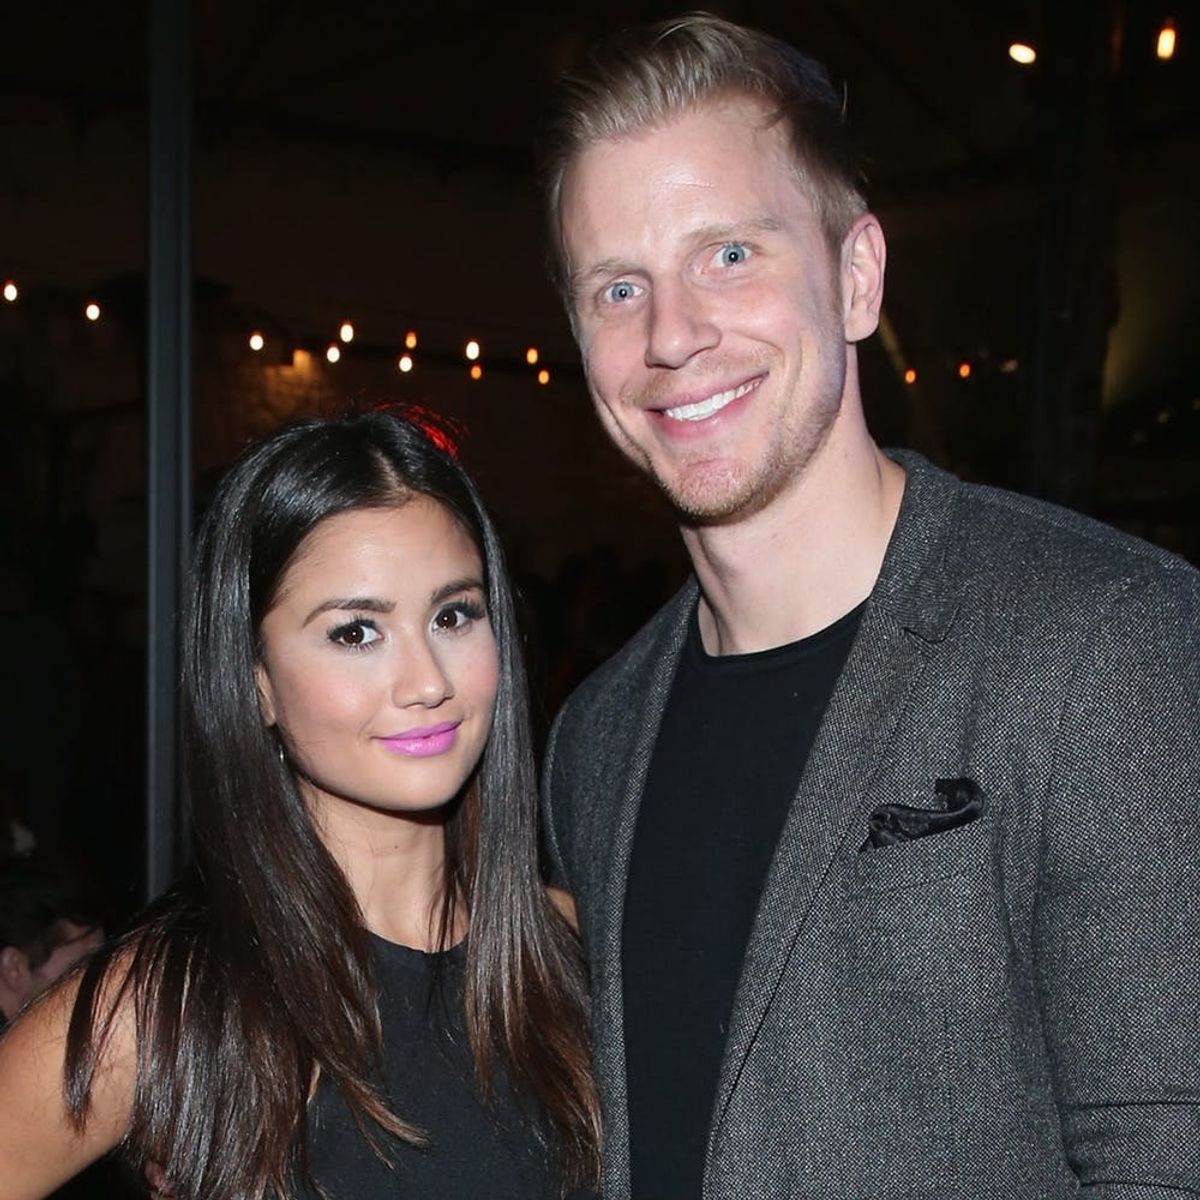 Here’s How Sean Lowe Thinks ‘The Bachelor’ Could Make More Long-Lasting Couples